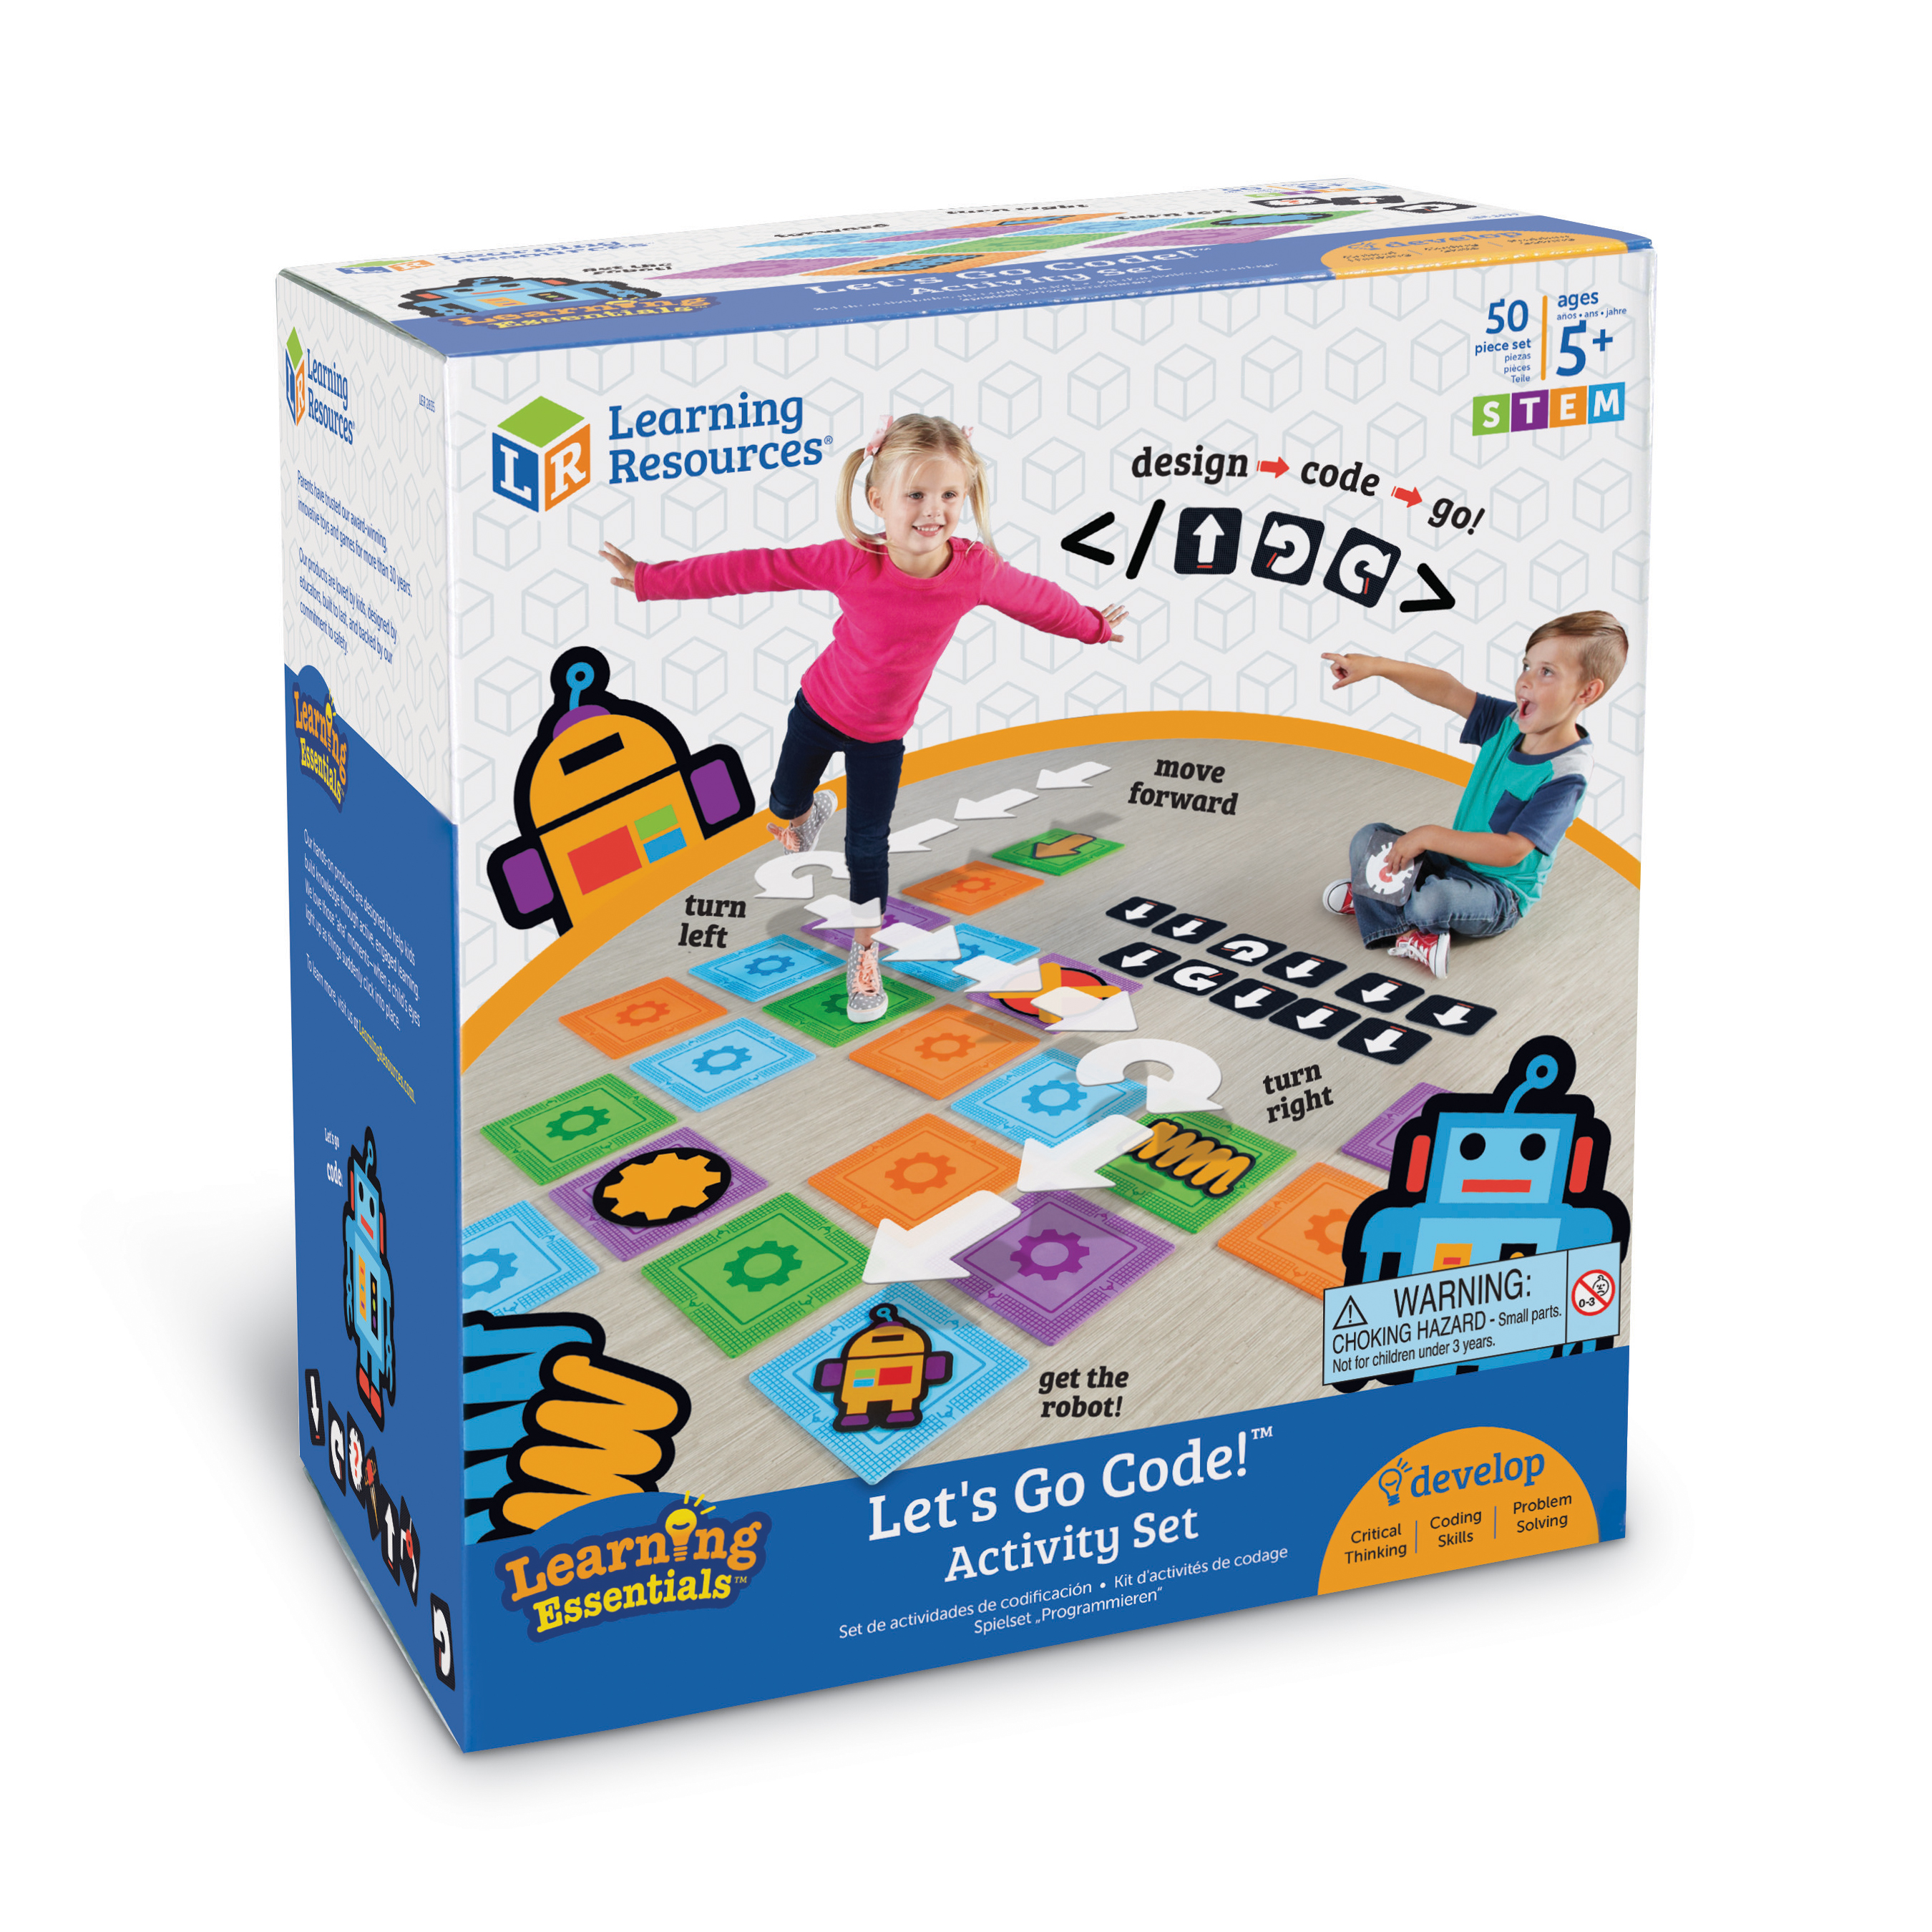 Learning Resources Learning Essentials - Let's Go Code! Activity Set